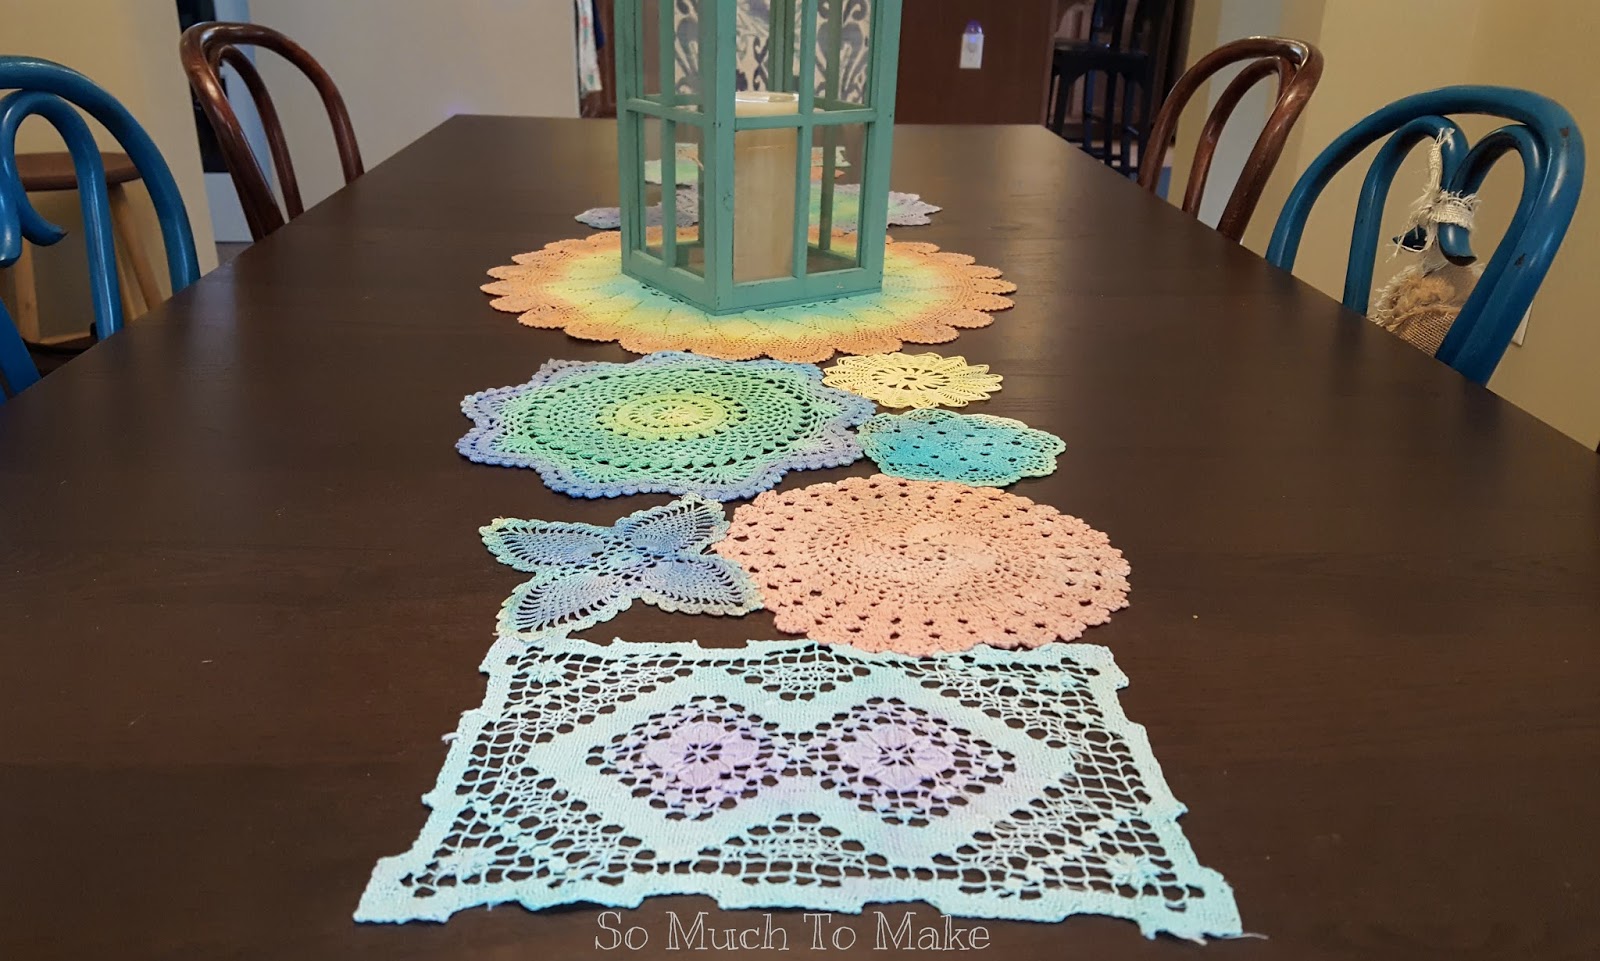 dyed vintage doily table runner much make coffee and end doilies high wood tables grey marble wooden dog house plans accent chairs for living room clearance swivel recliner